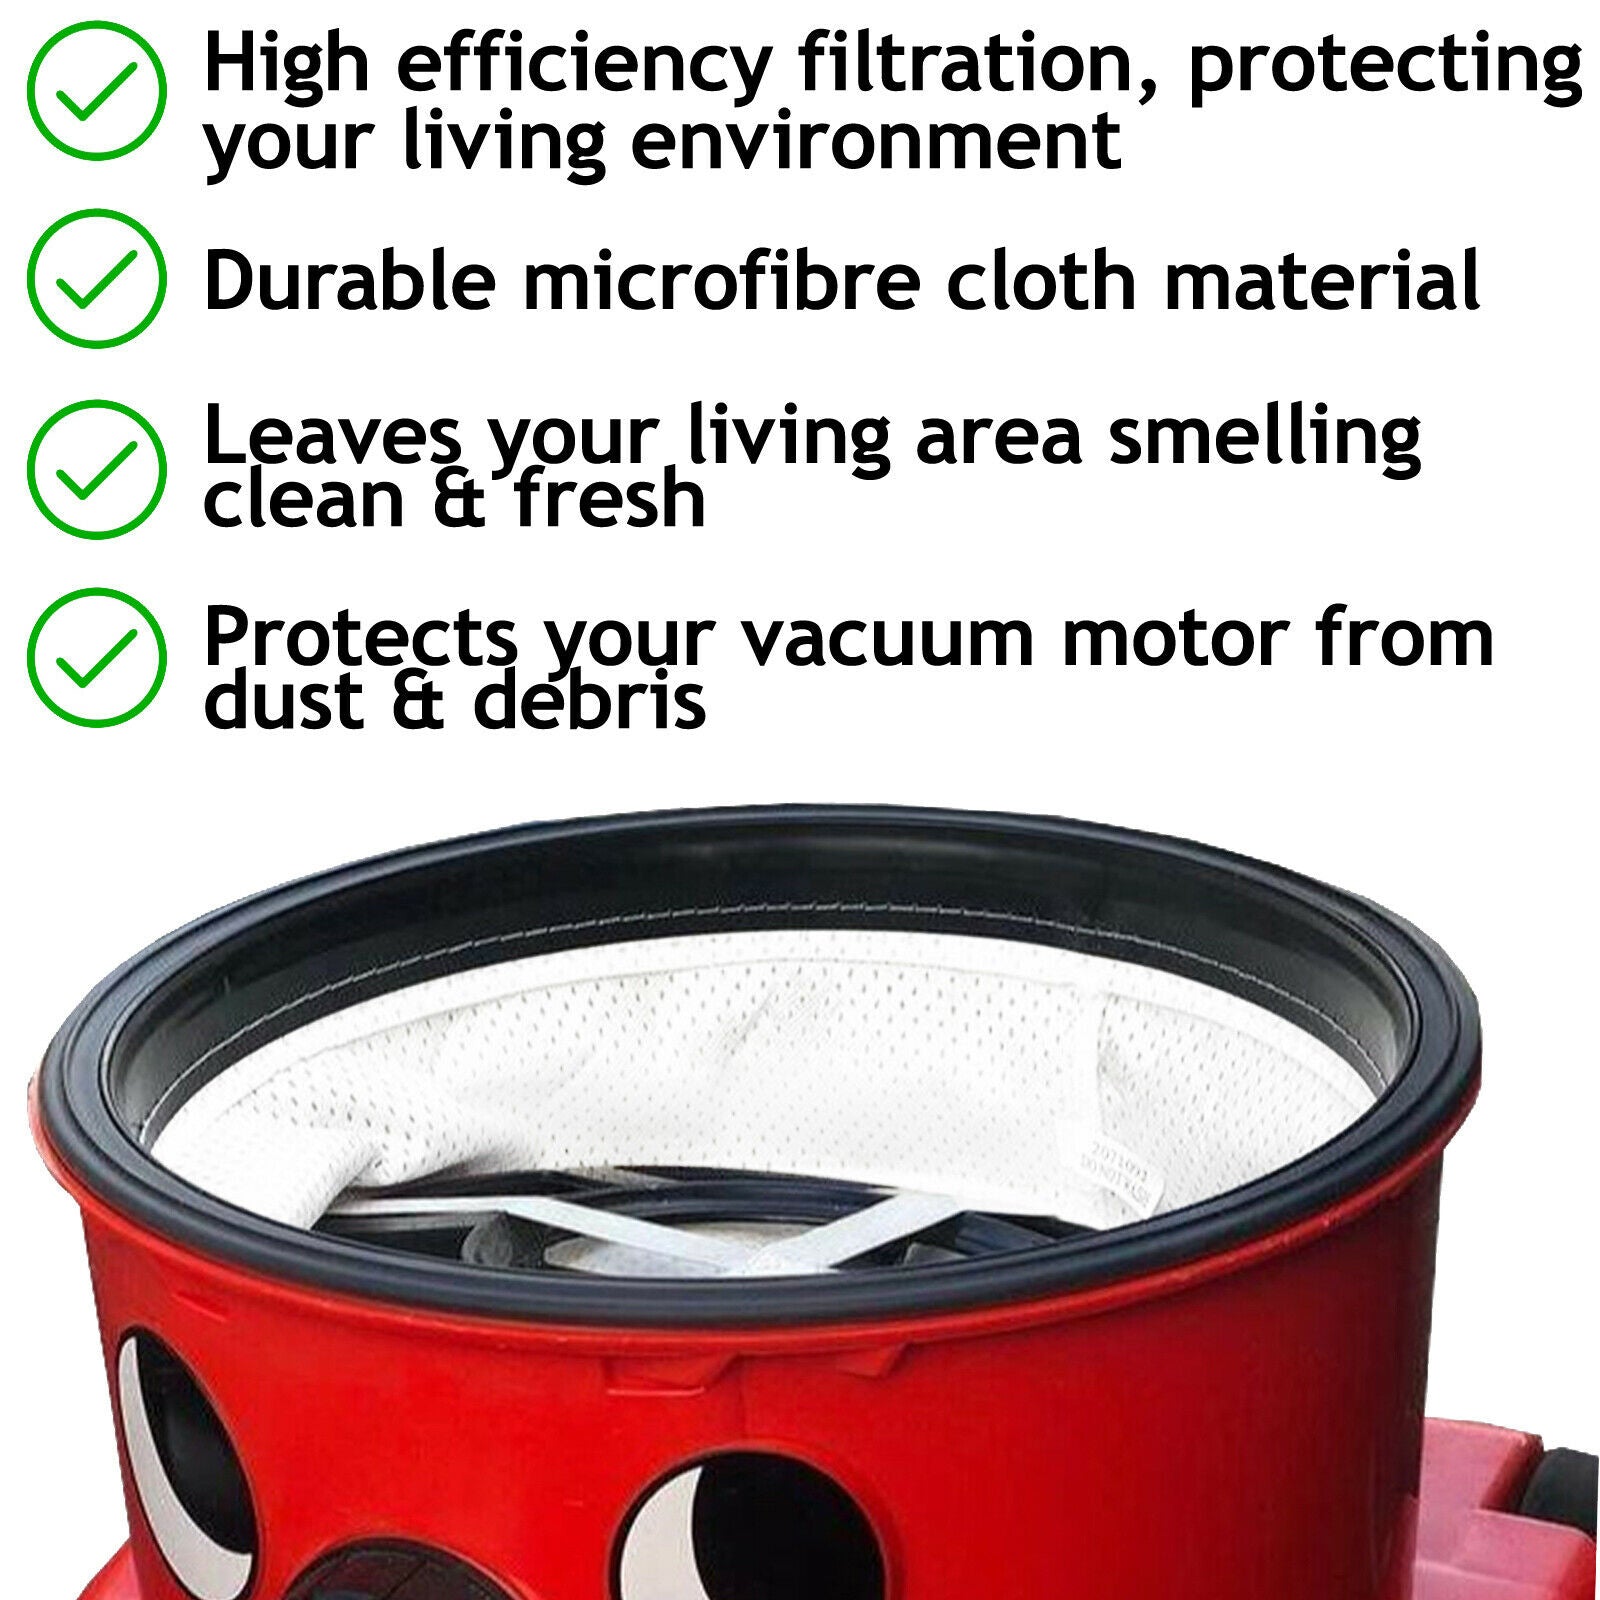 Filter & Reusable Bags for Numatic Henry Hetty James Vacuum Cleaner